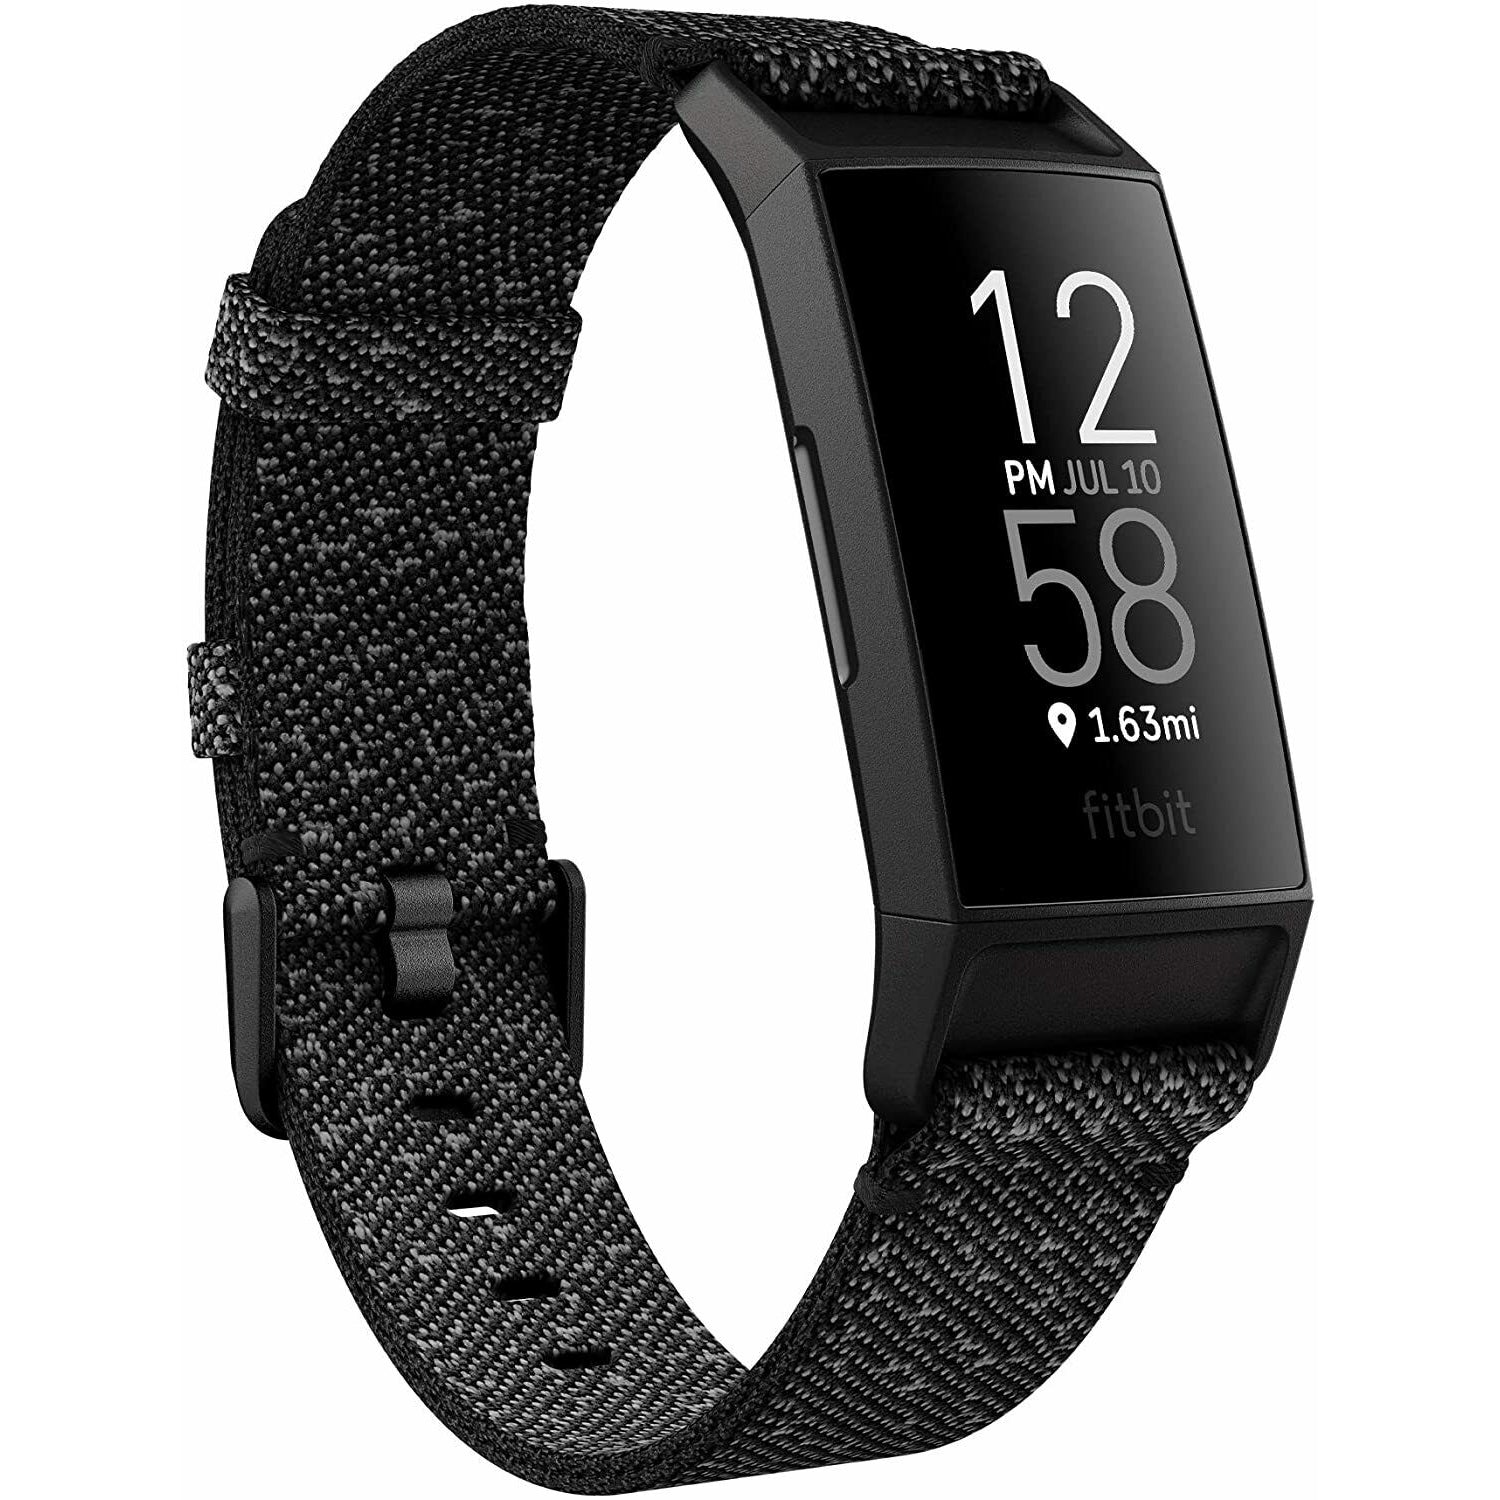 Fitbit Charge 4 Advanced Fitness Tracker with GPS - Granite Woven - Refurbished Good